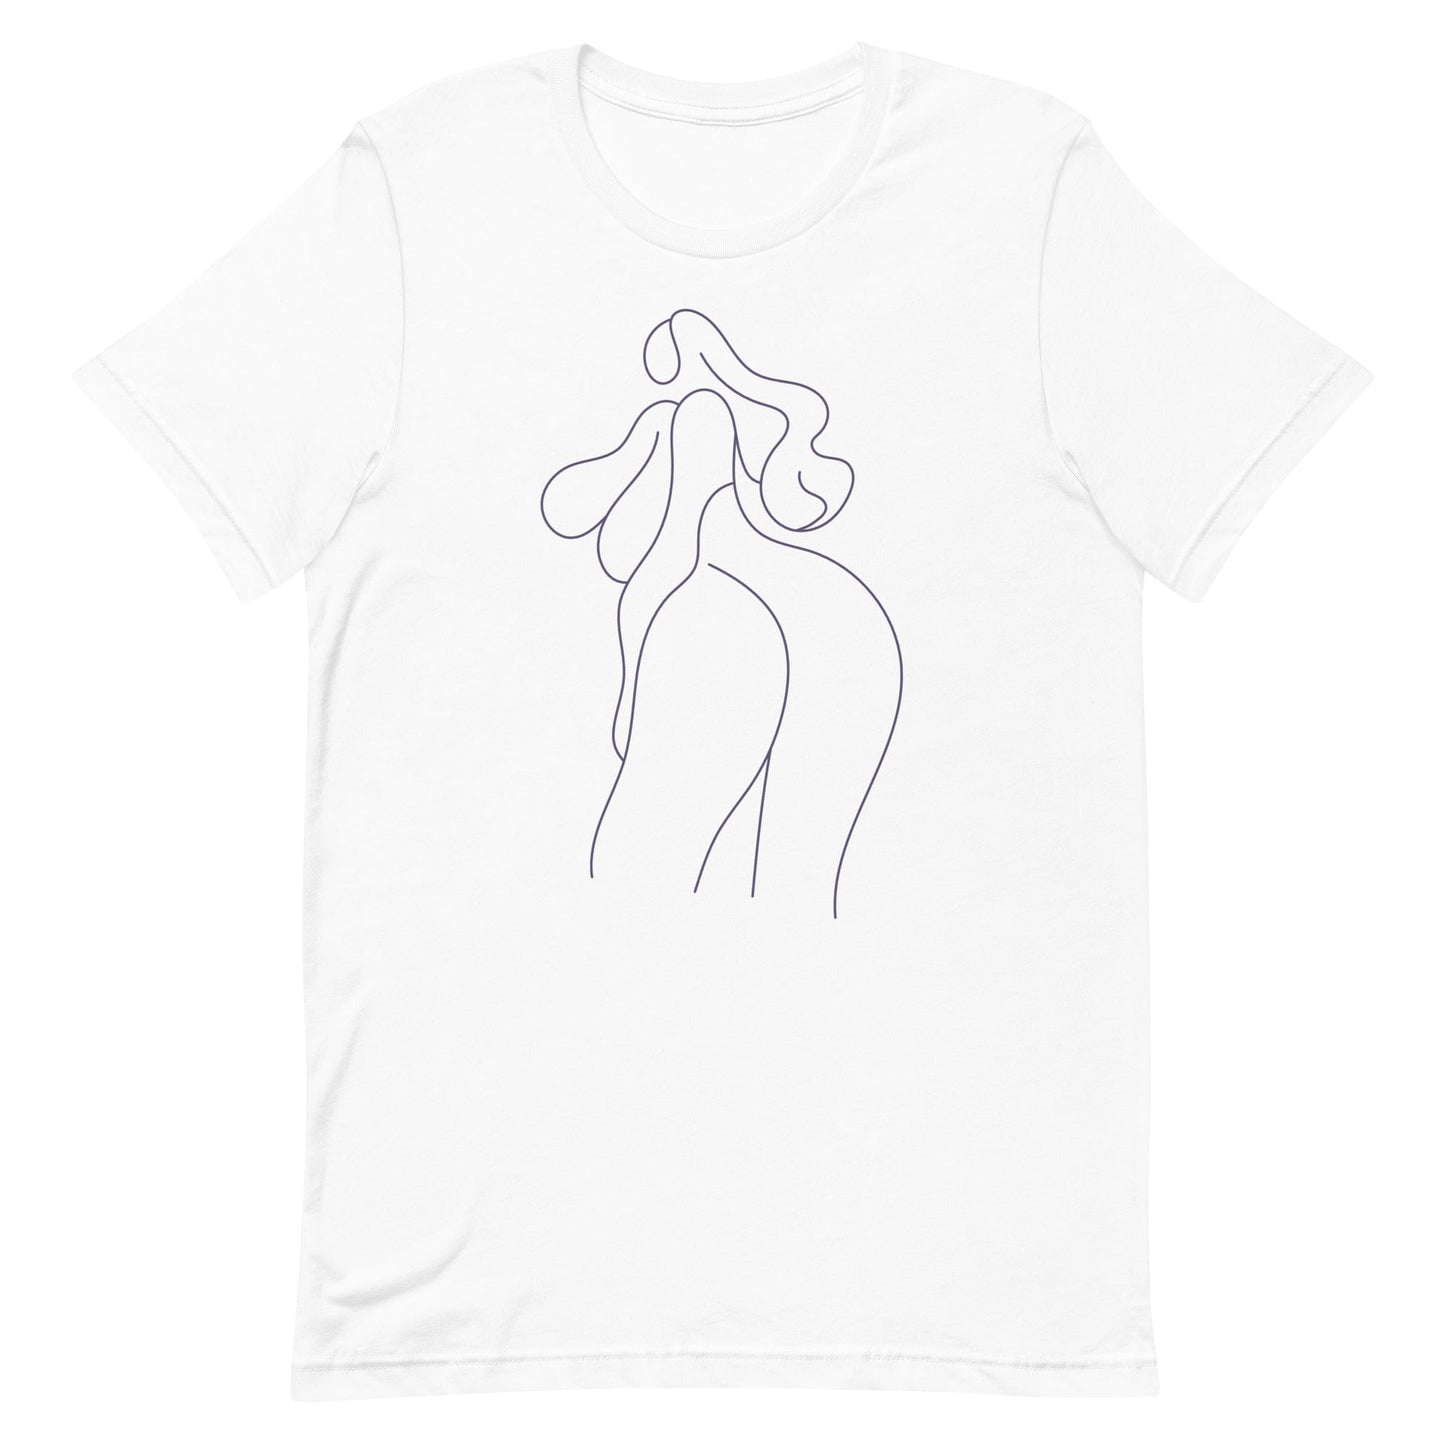 drawing-female-body-tshirt-apparel-at-feminist-define-white-front